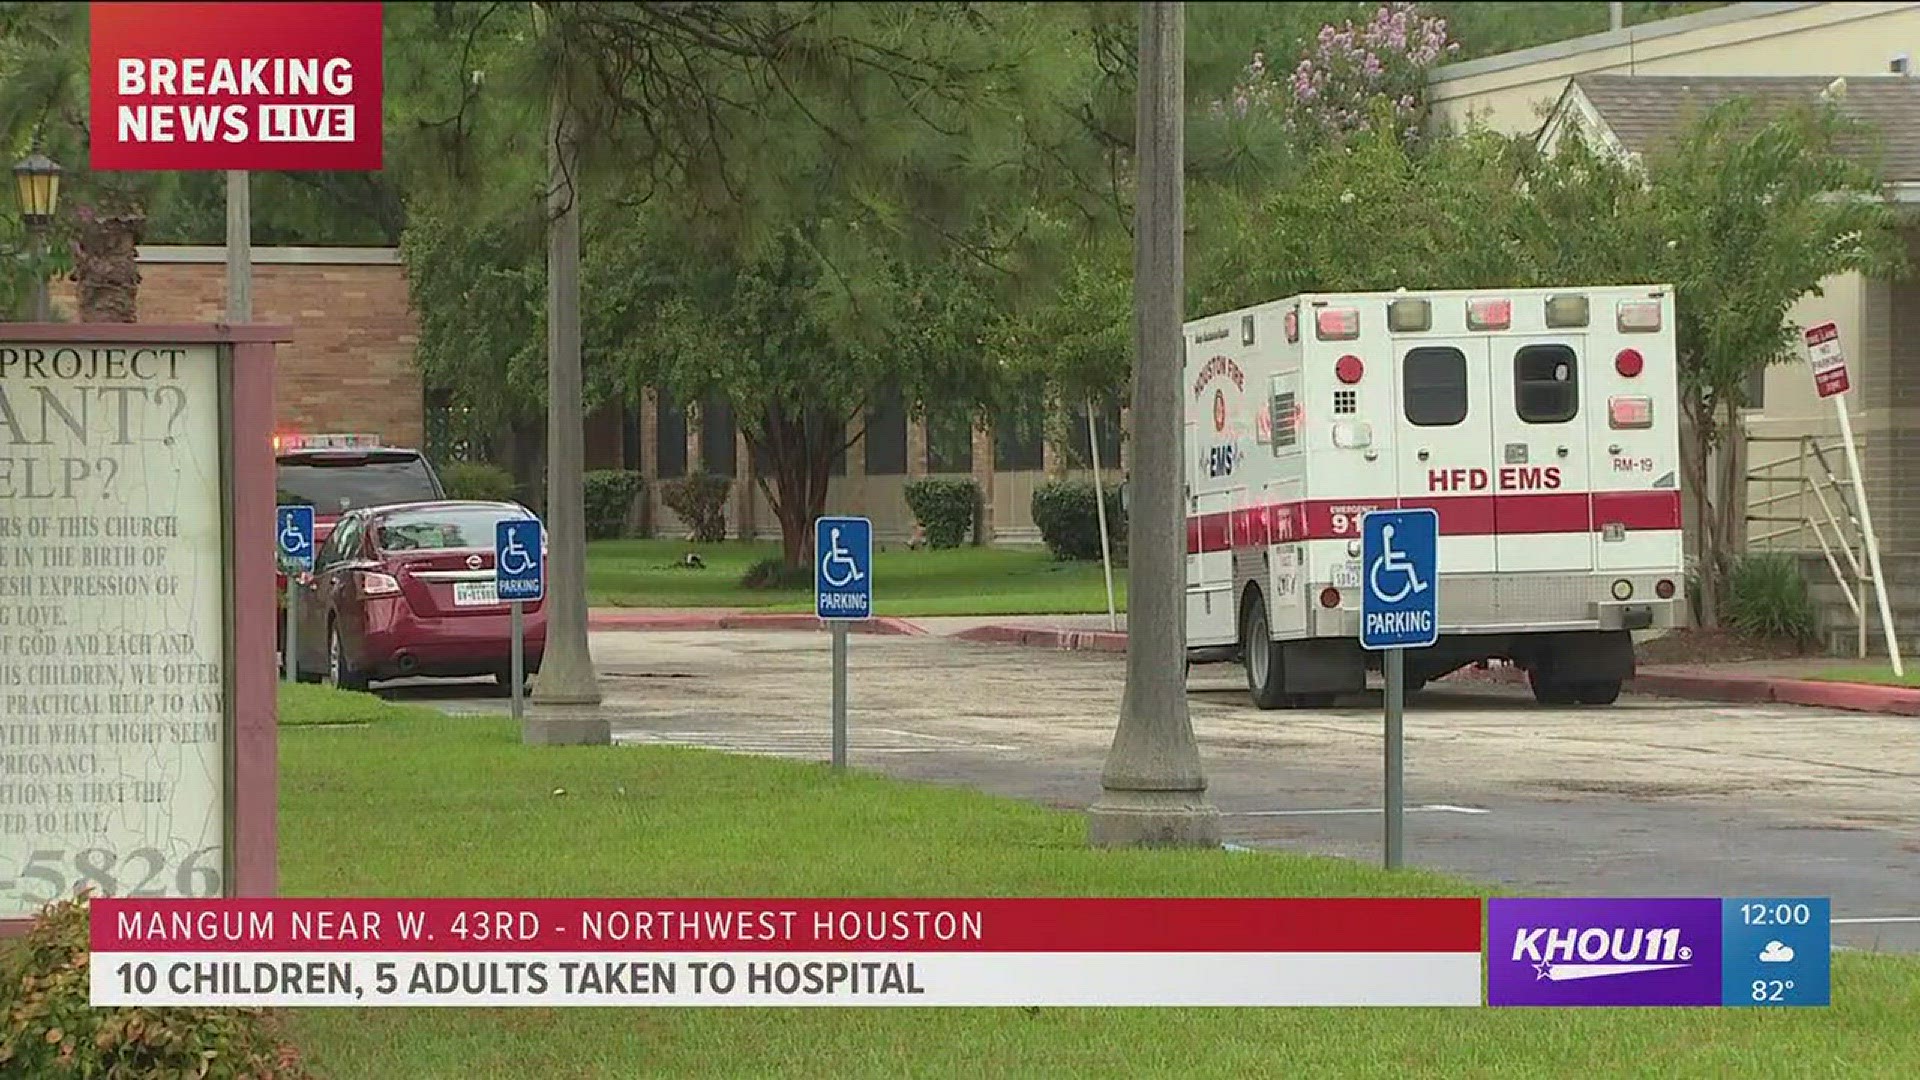 Eleven children and five adults were transported to local hospitals after reports of a gas leak near KIPP Nexus School and St. Ambrose Catholic School in northwest Houston.